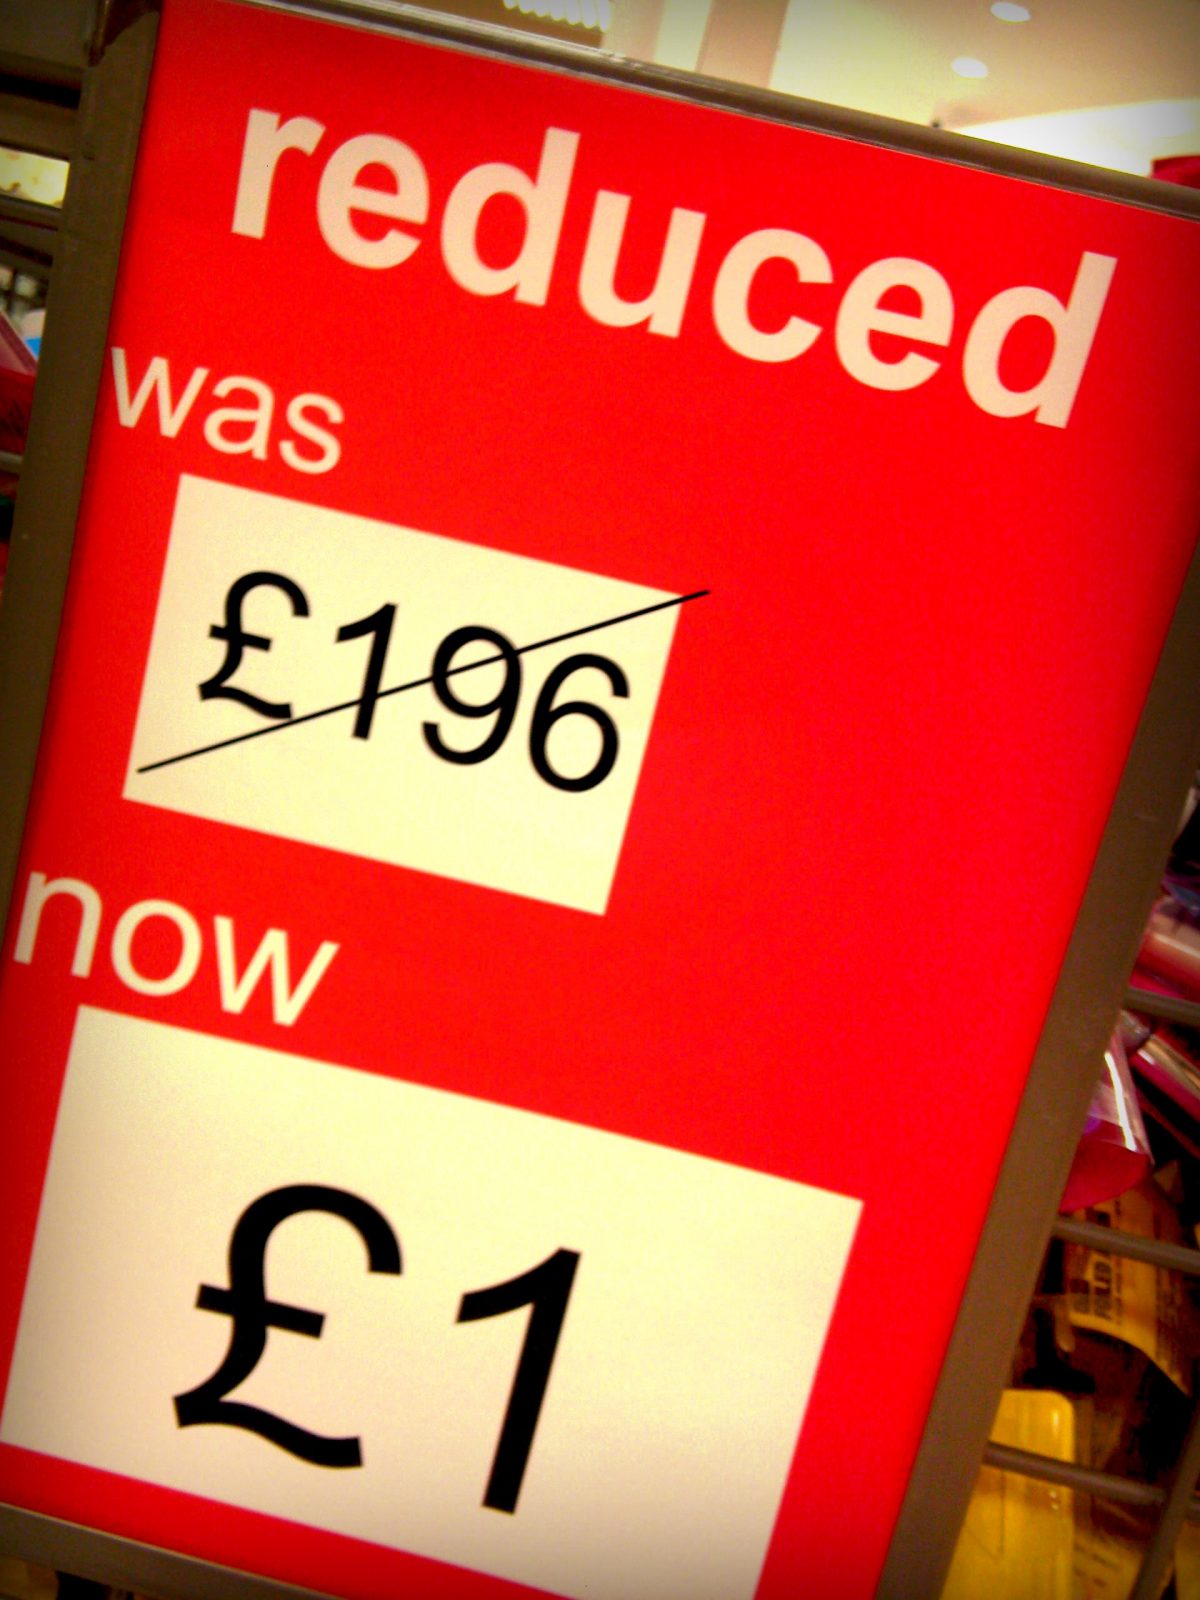 Wow. That's an astonishing reduction.